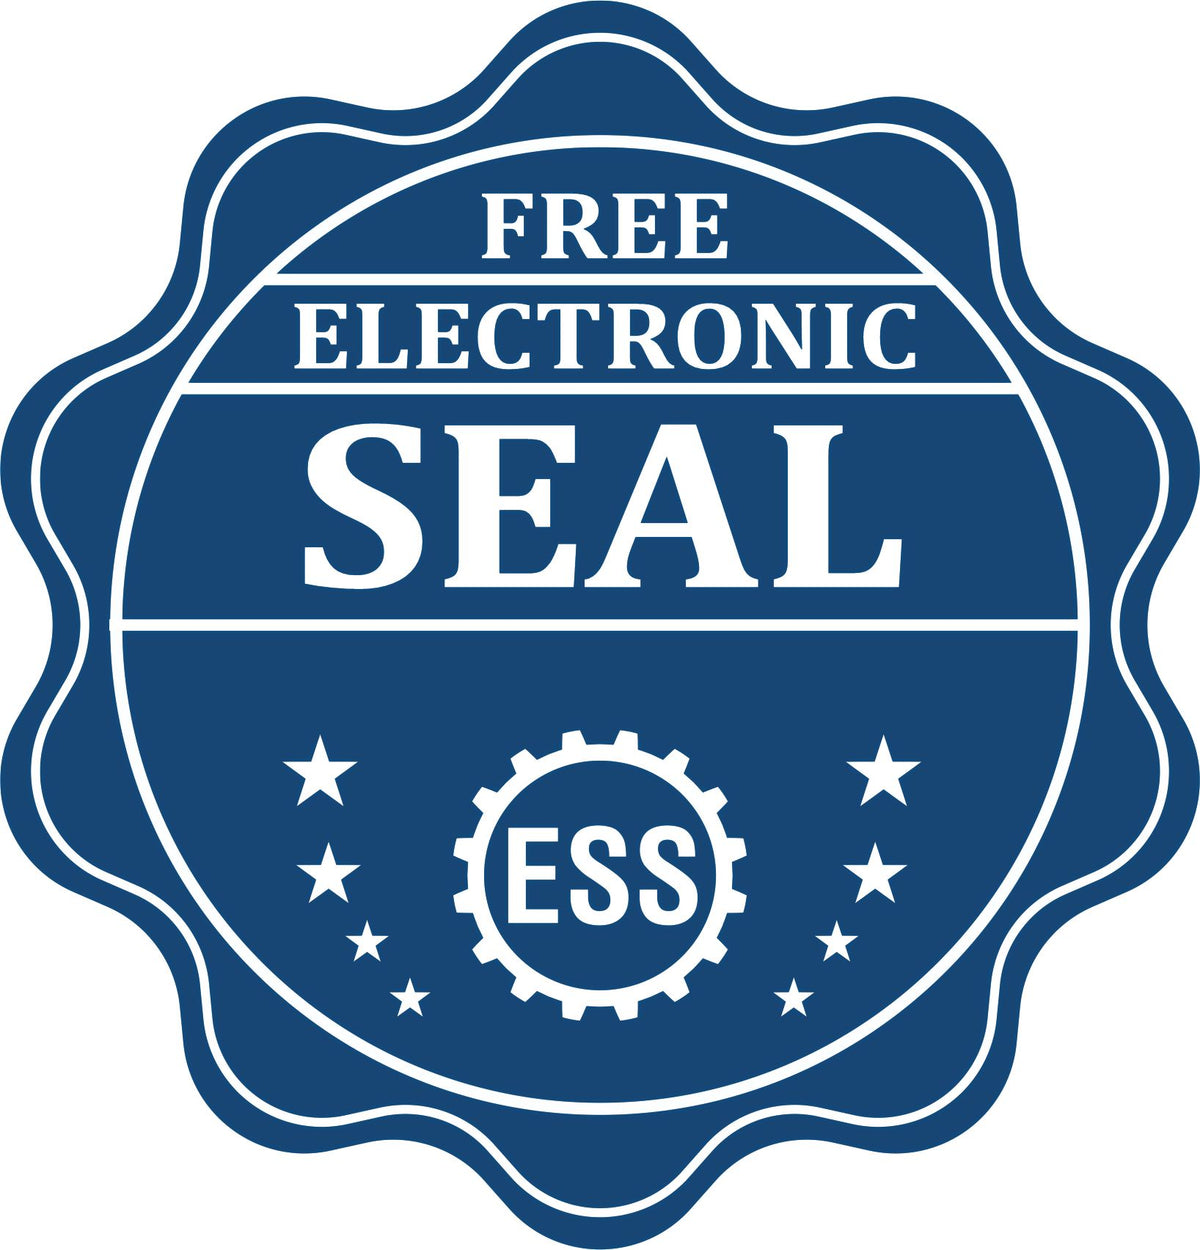 A badge showing a free electronic seal for the Slim Pre-Inked Connecticut Landscape Architect Seal Stamp with stars and the ESS gear on the emblem.